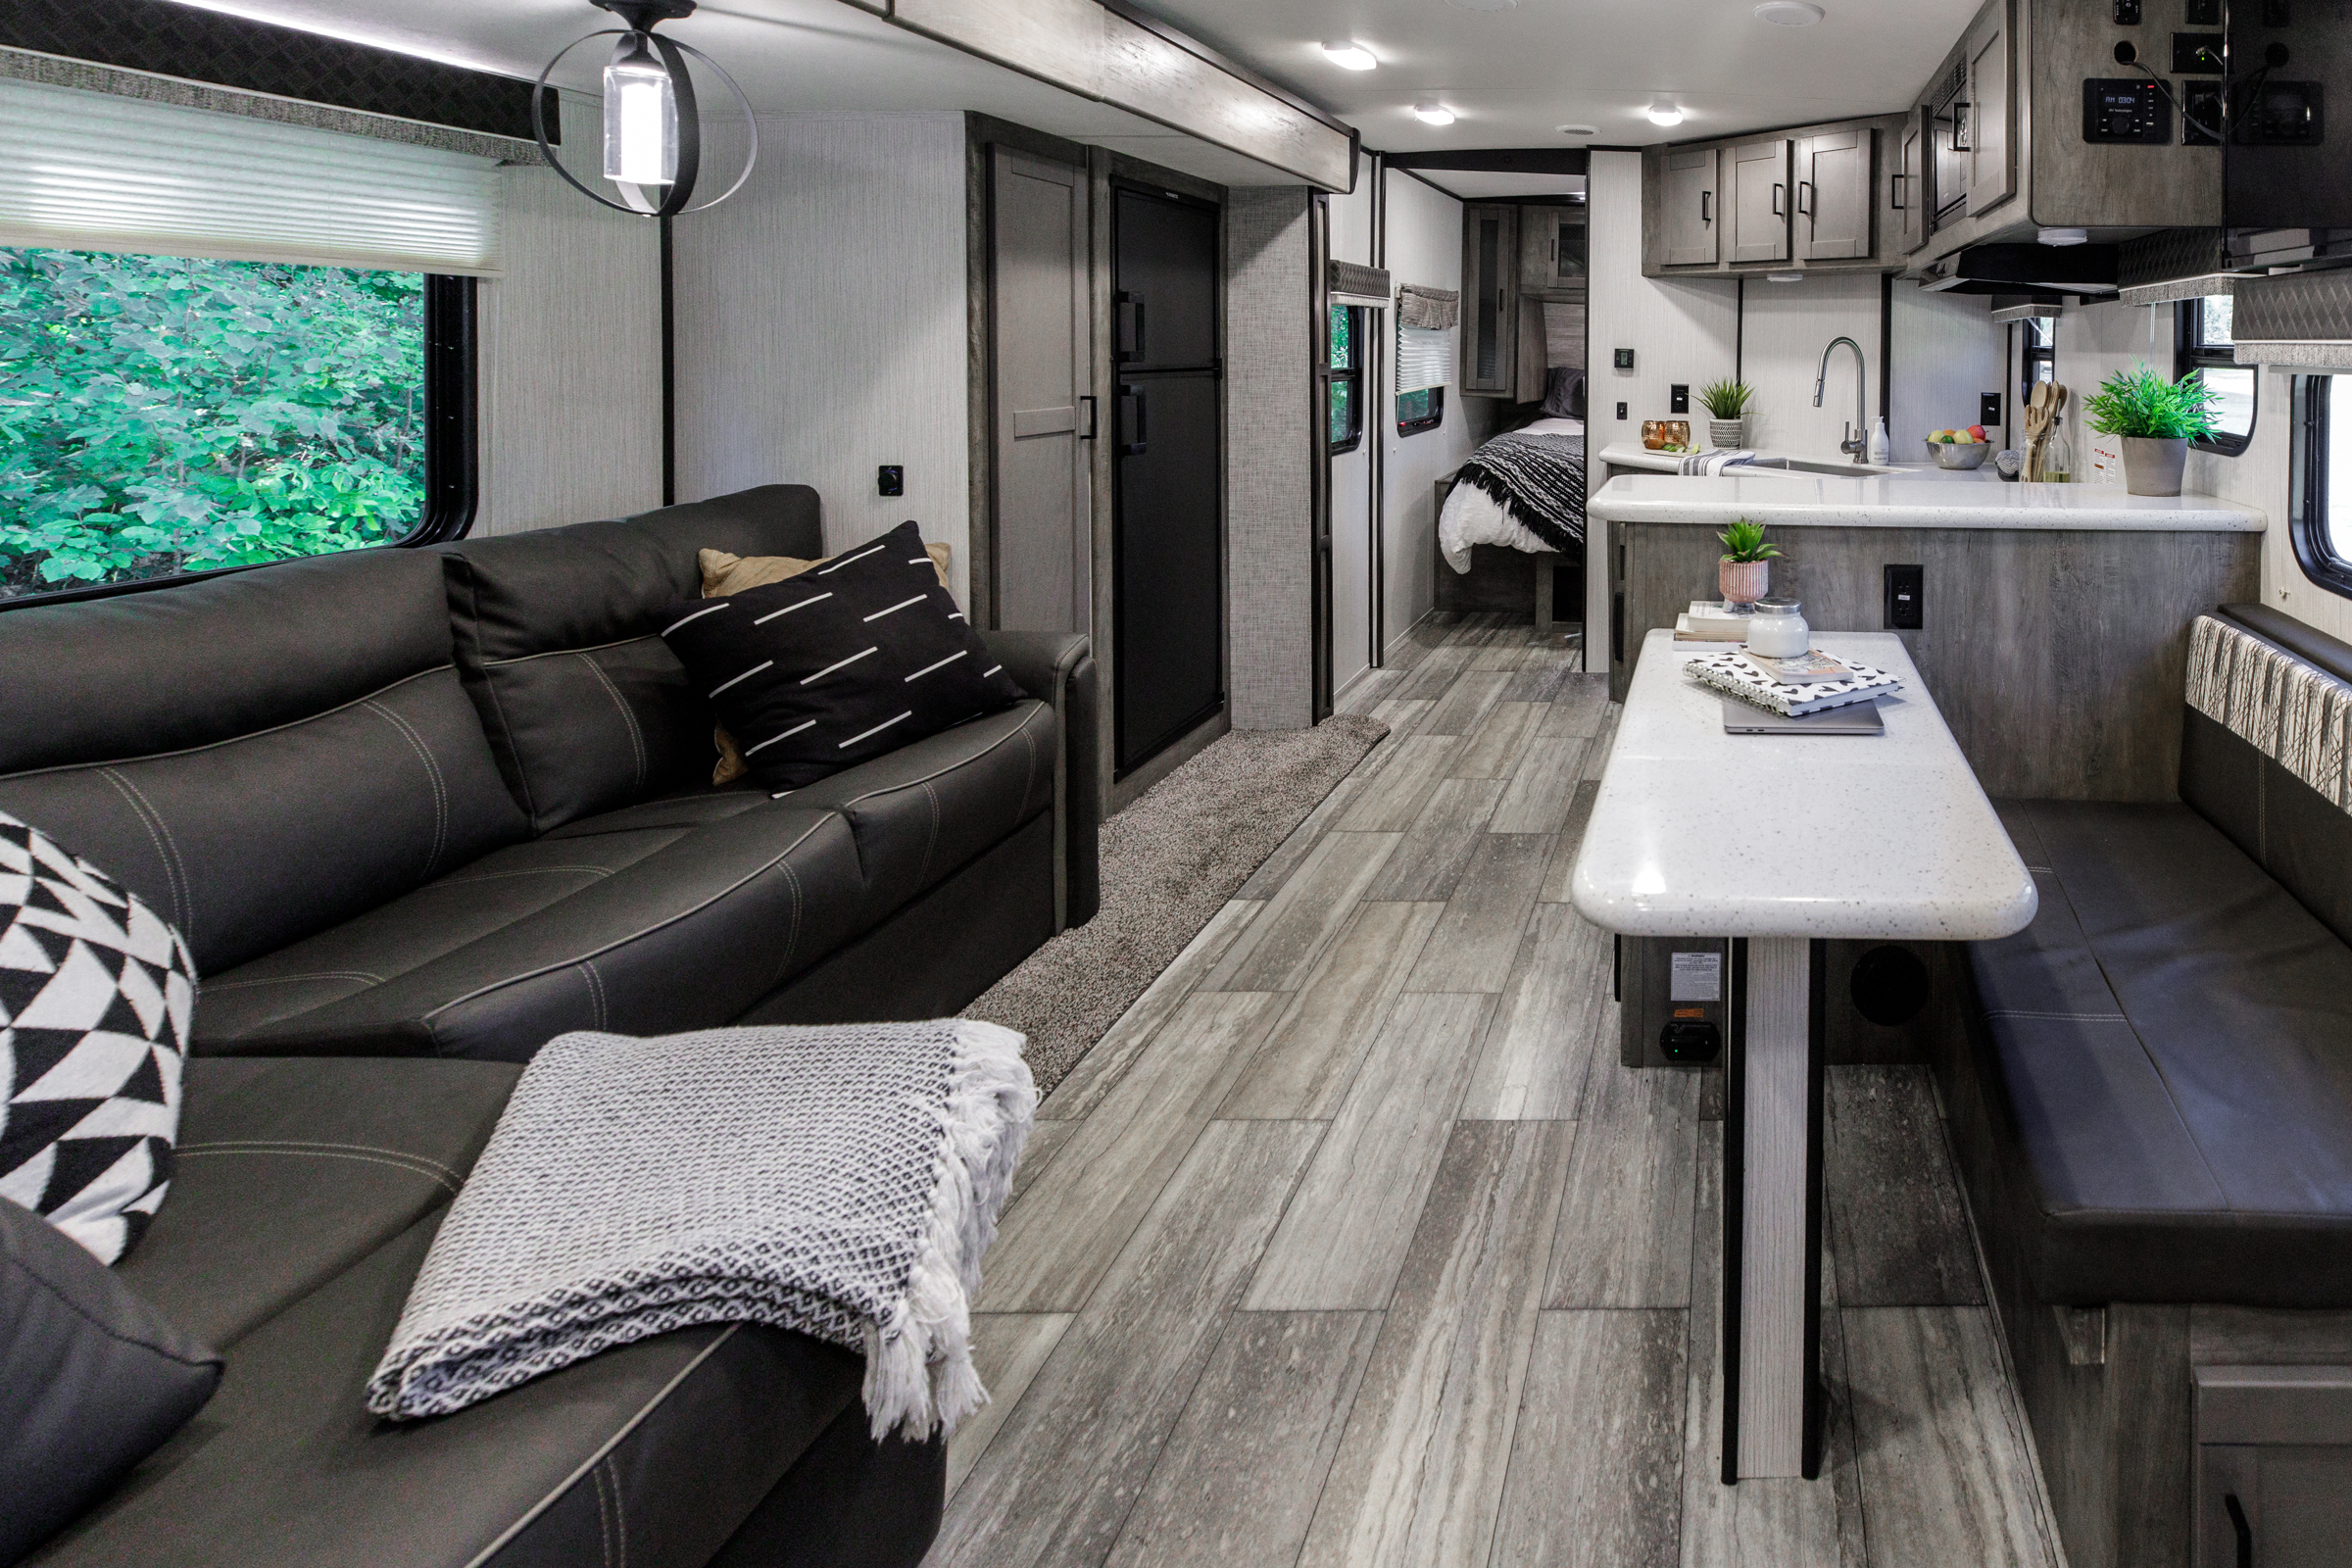 The interior layout and design of the North Trail RV.